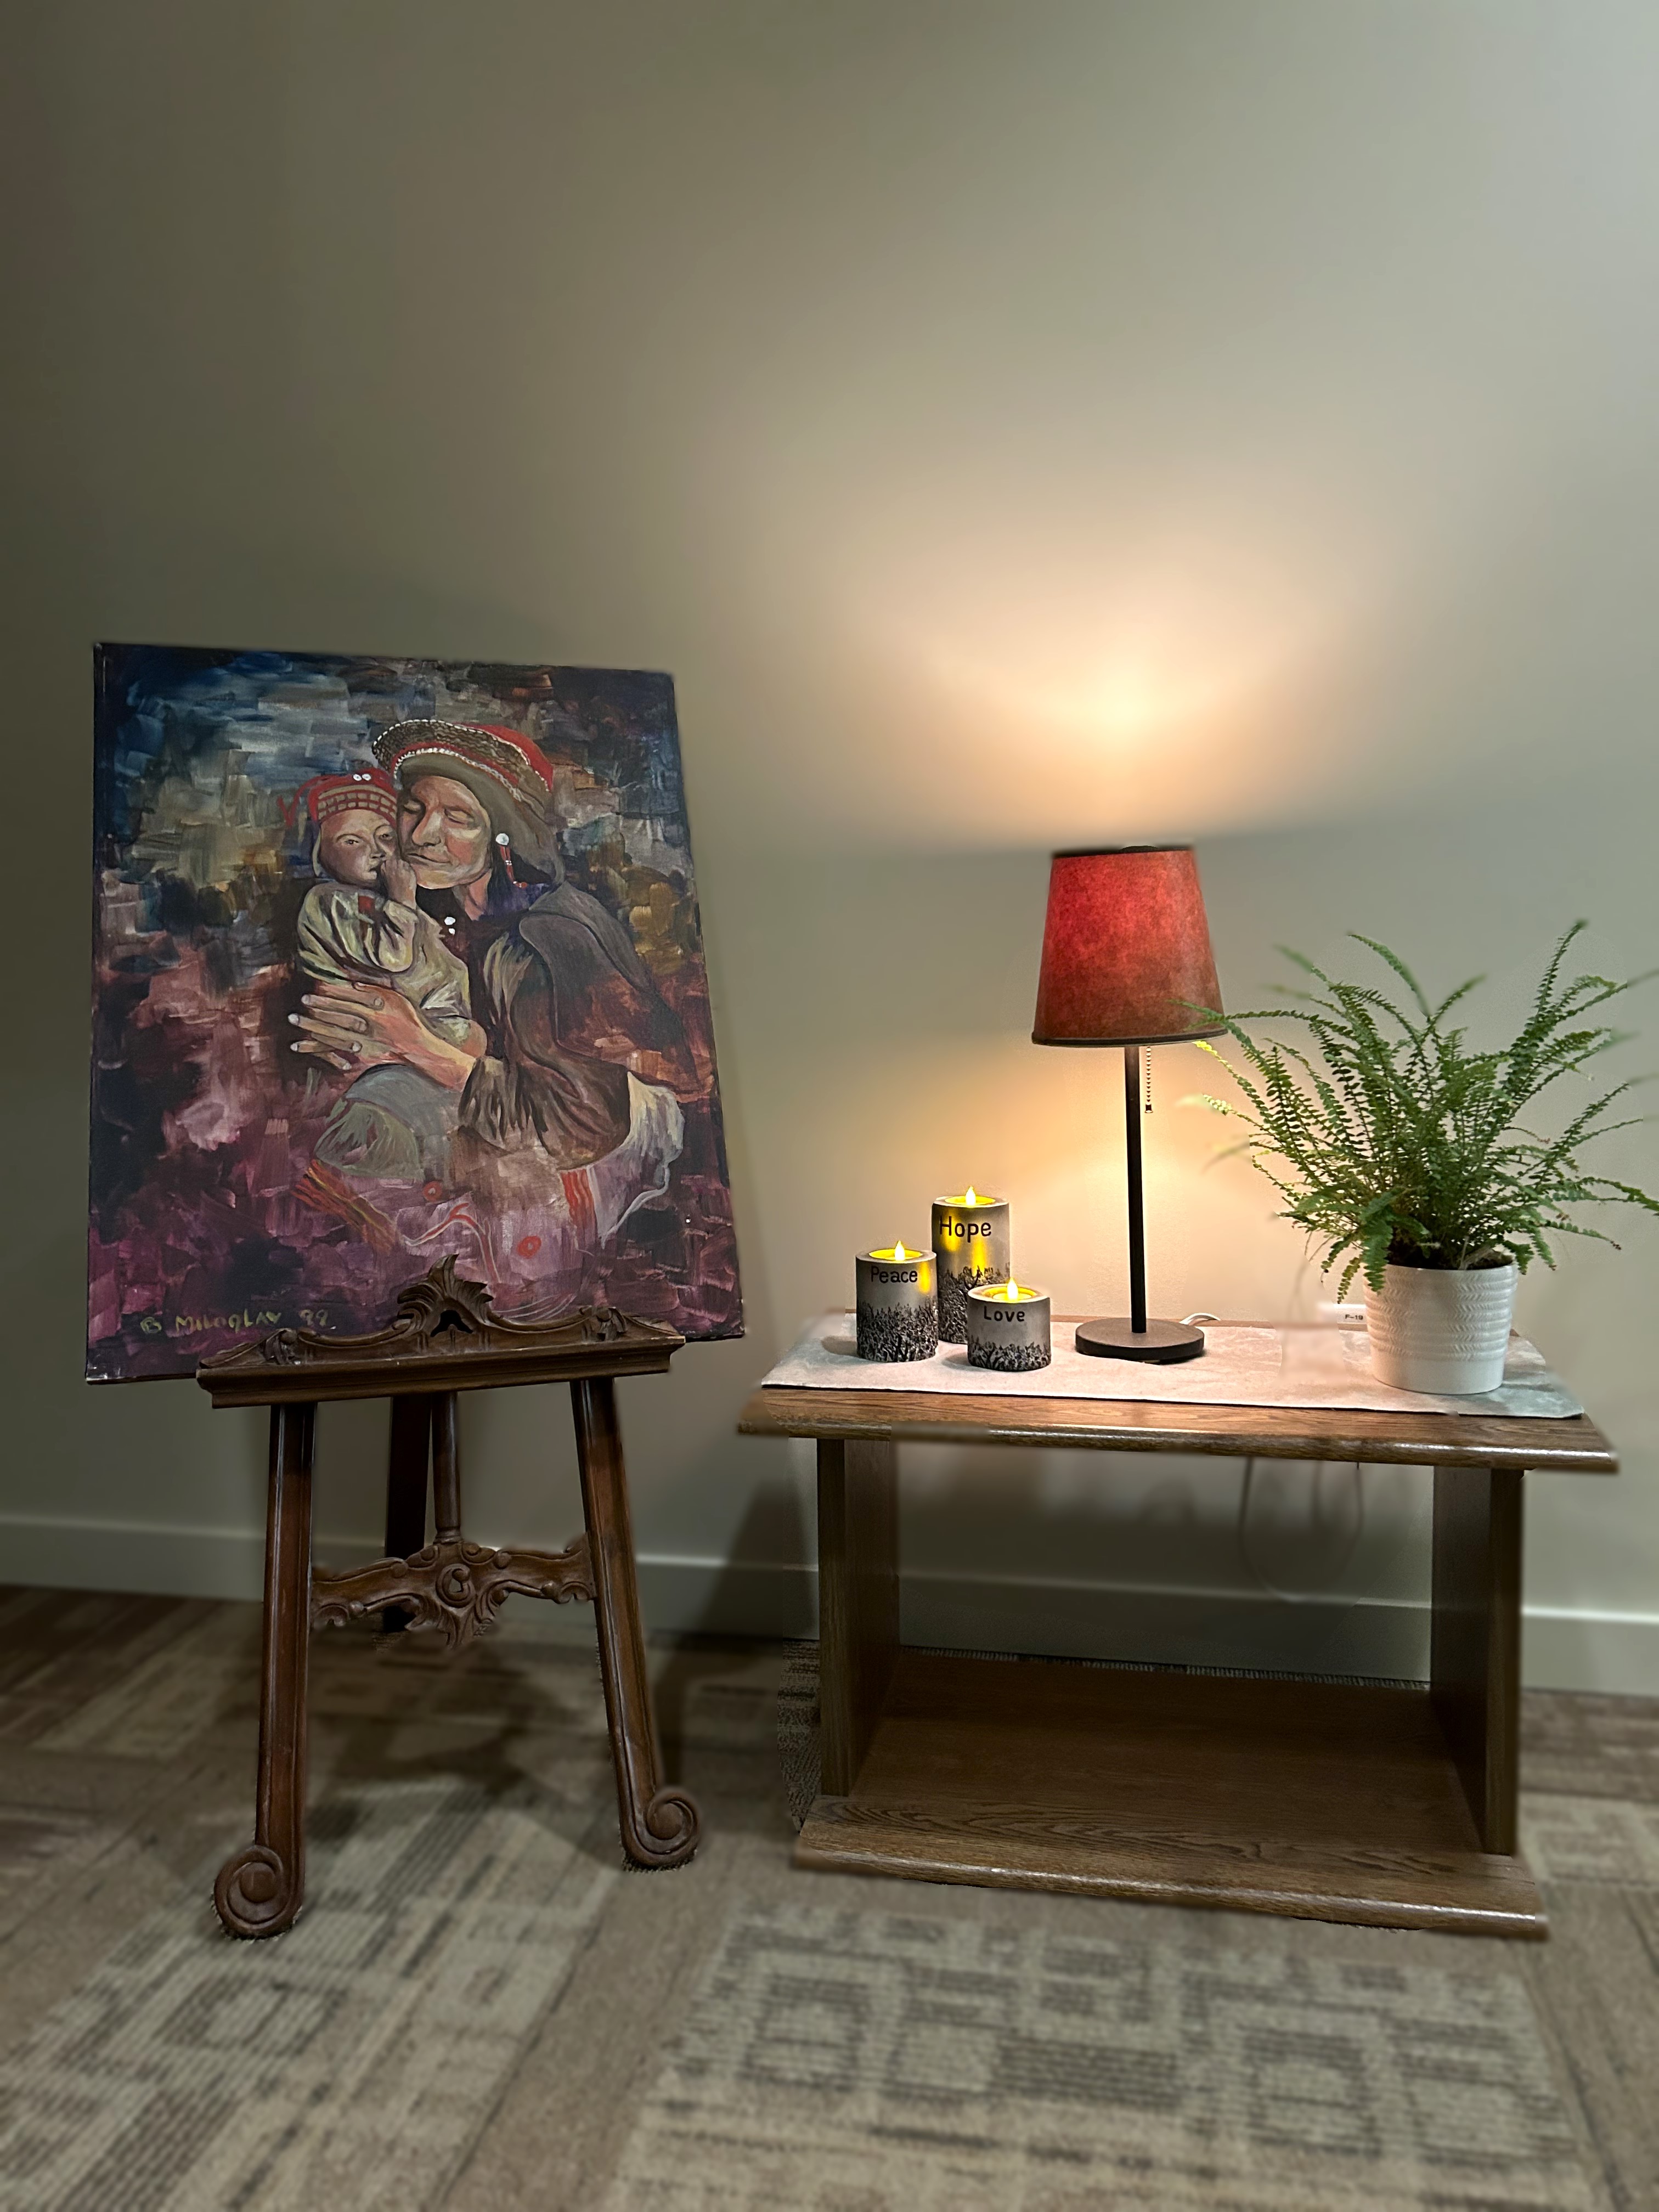 A display with art, a lamp, candles and flowers. The art is a picture of a mother holding a baby.